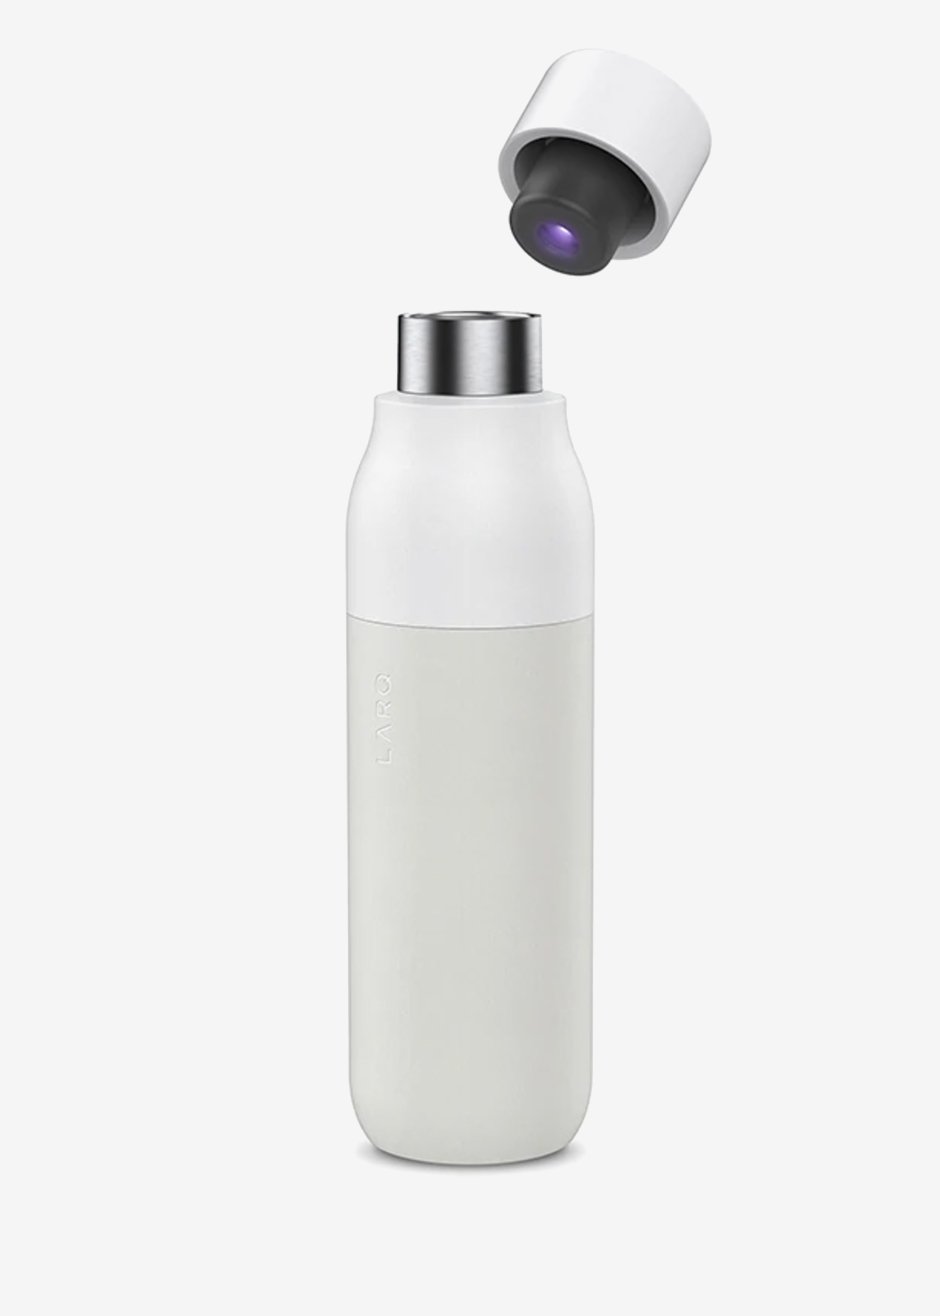 LARQ Water Bottle Twist Top in Granite White, 17 oz | Stainless Steel, Insulated, Double-Wall Vacuum Bottle